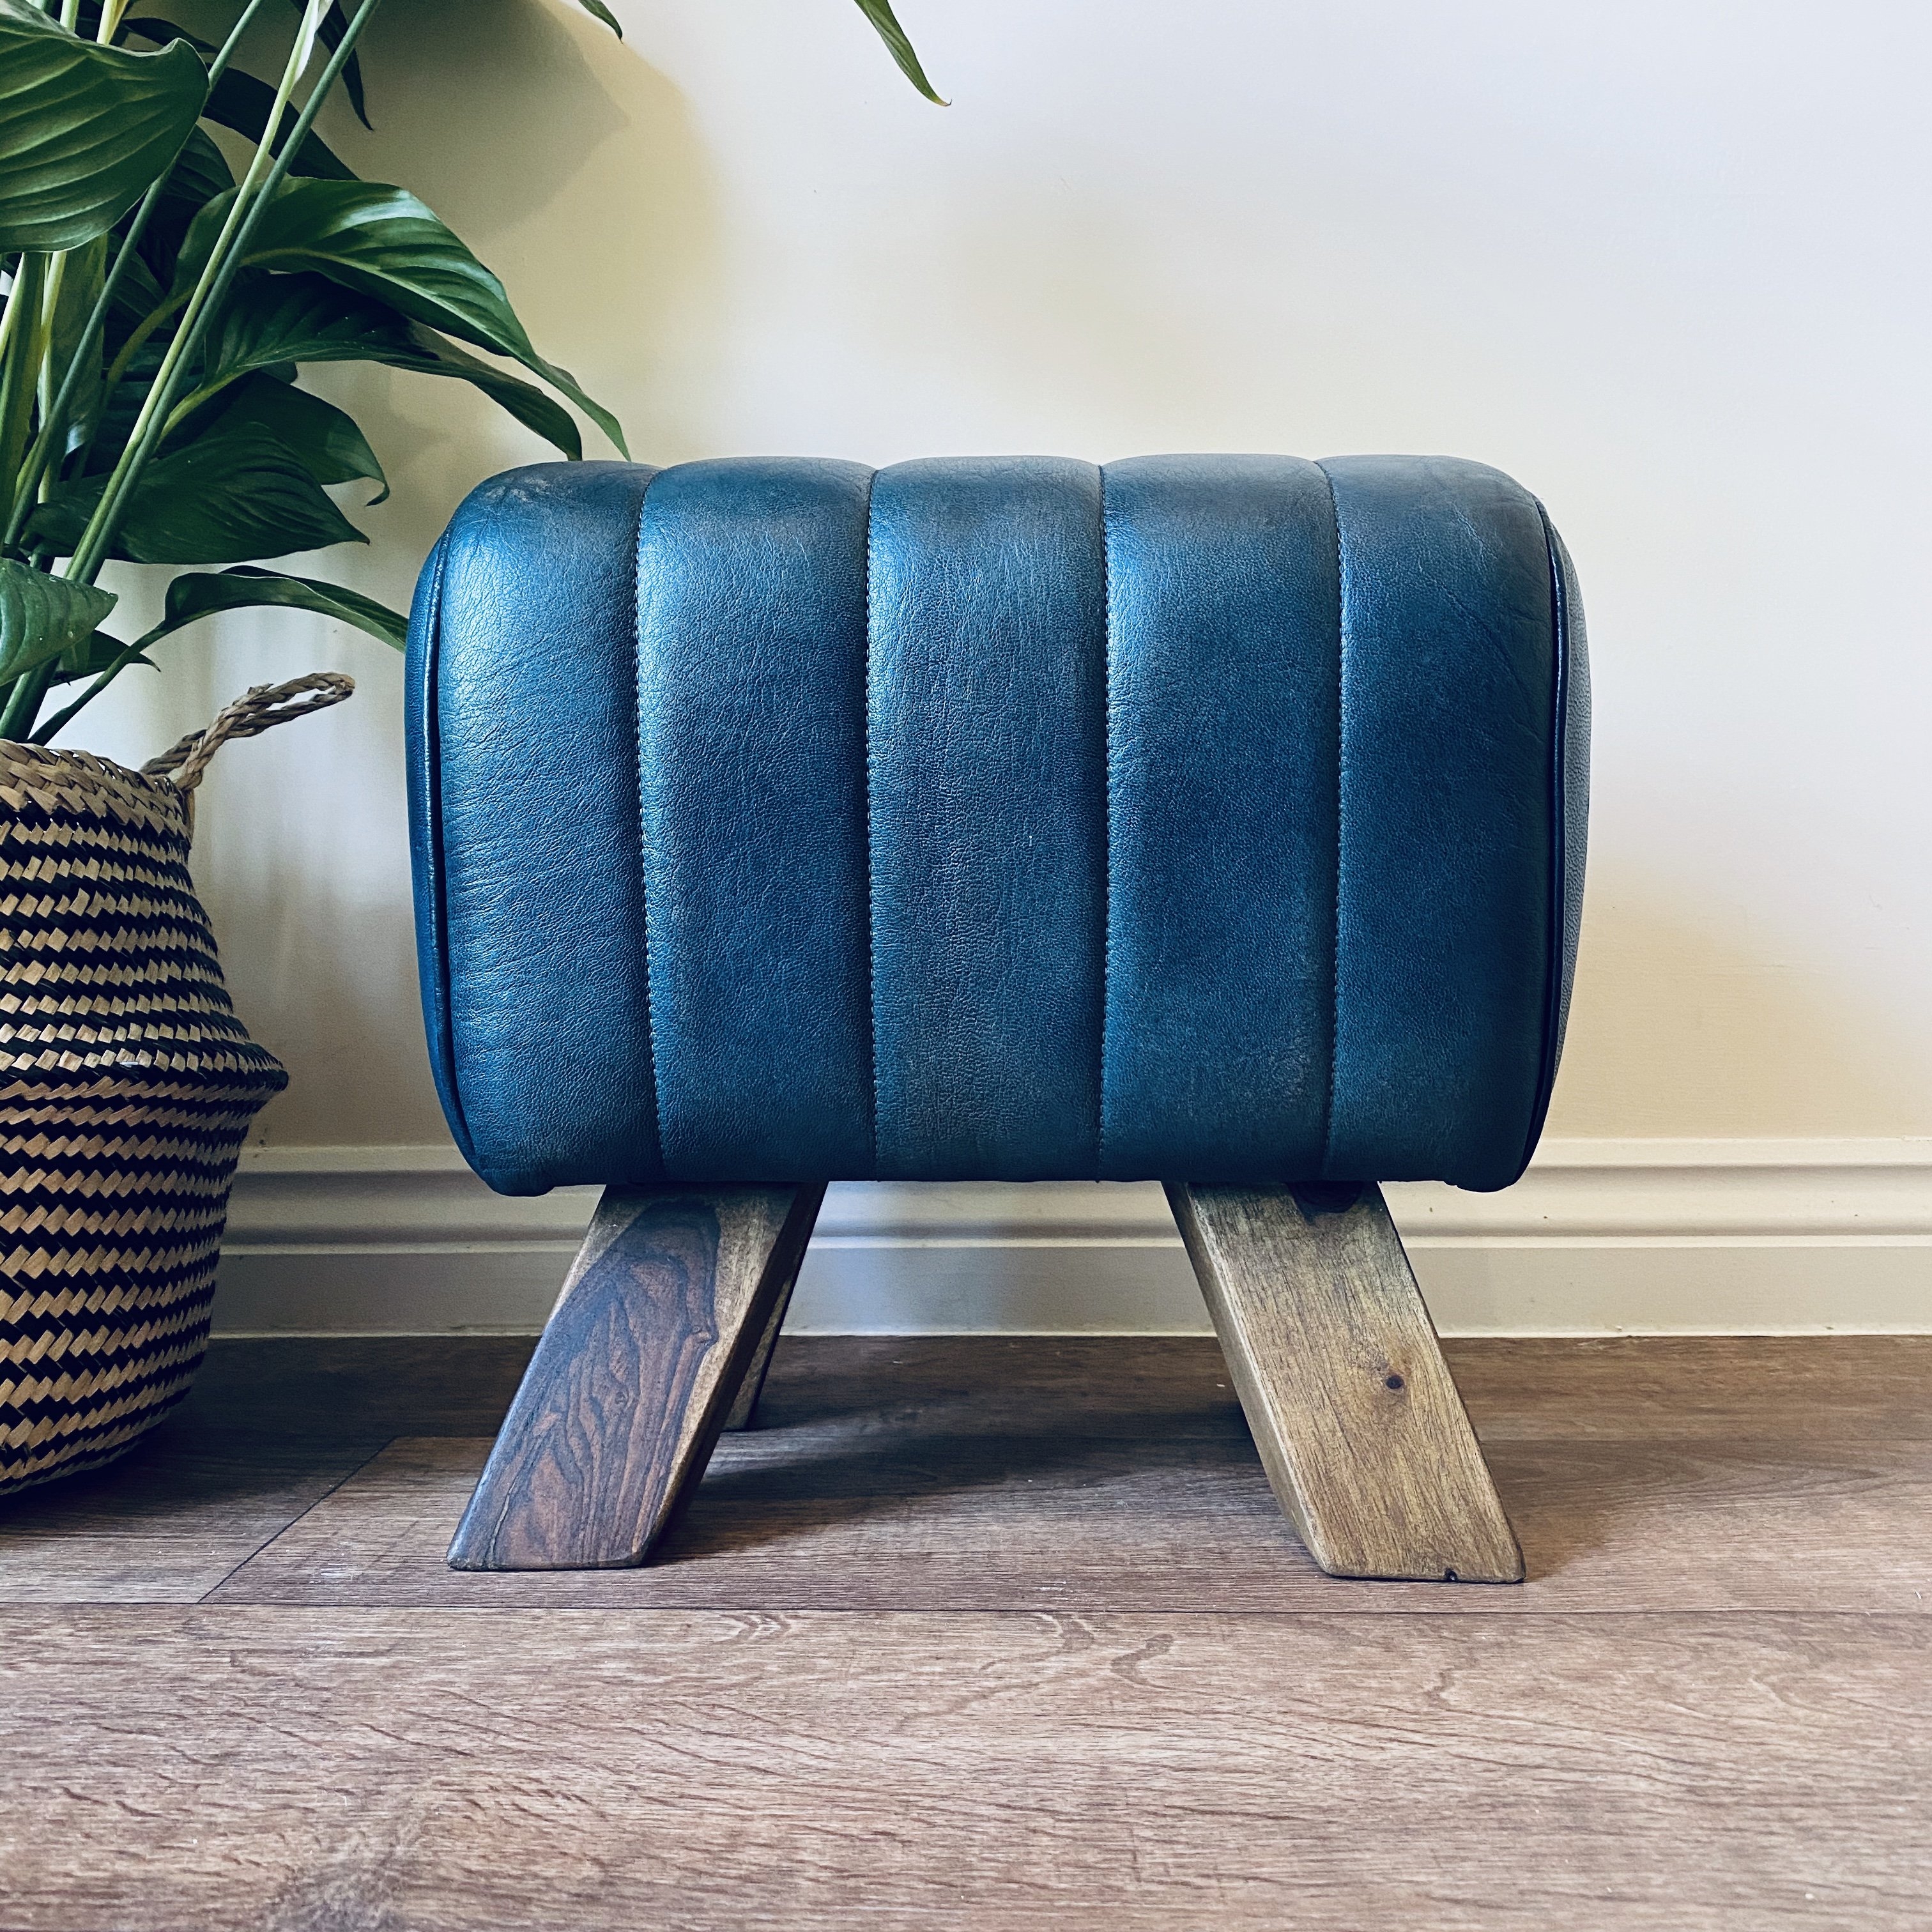 Blue Leather Footstool Pommel Horse | Smallhill Furniture Co. | Reproductions